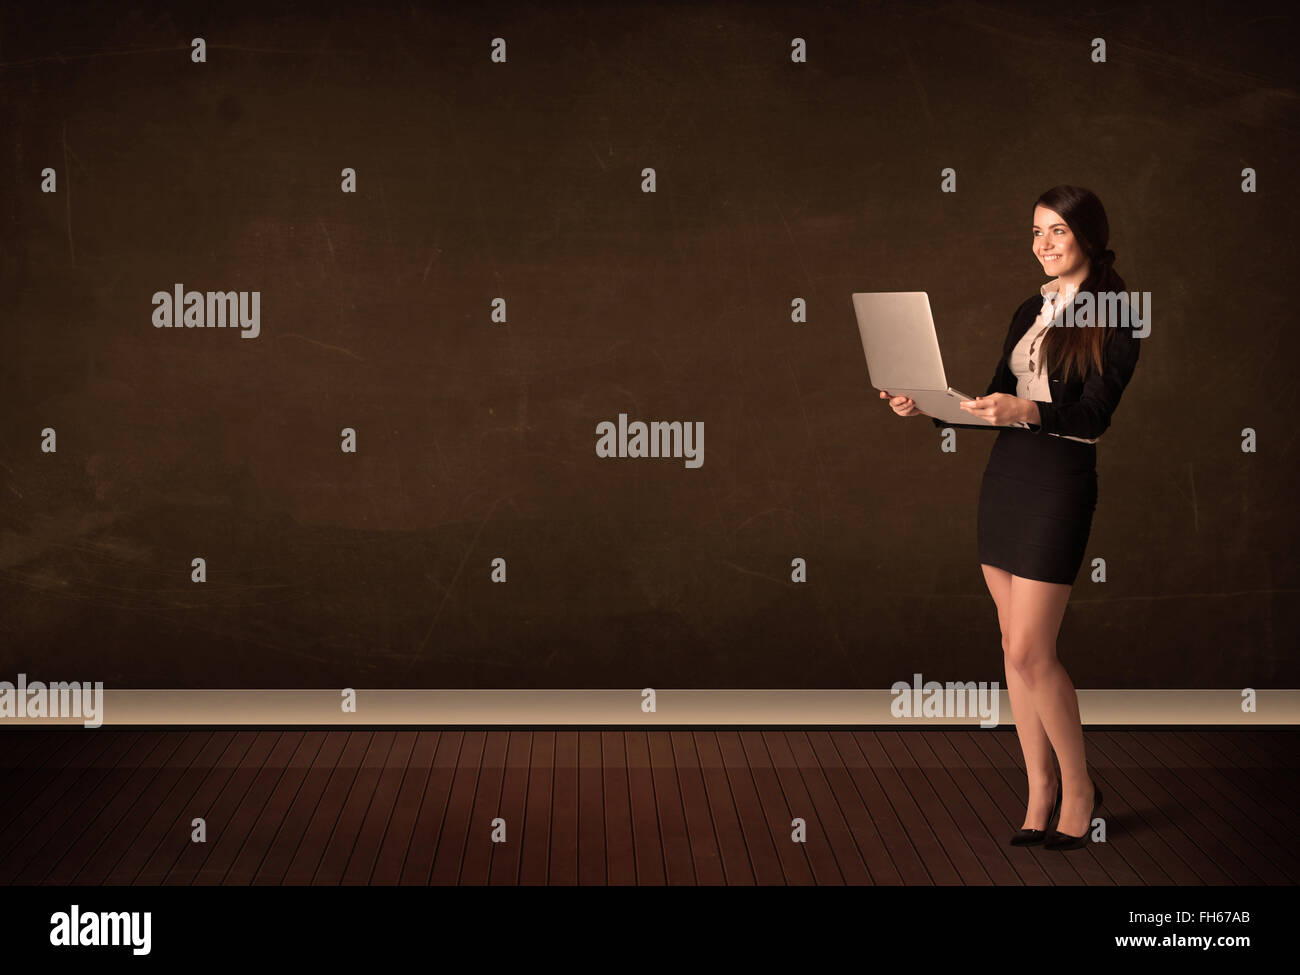 Businesswoman holding high tech laptop on background with copyspace Stock Photo